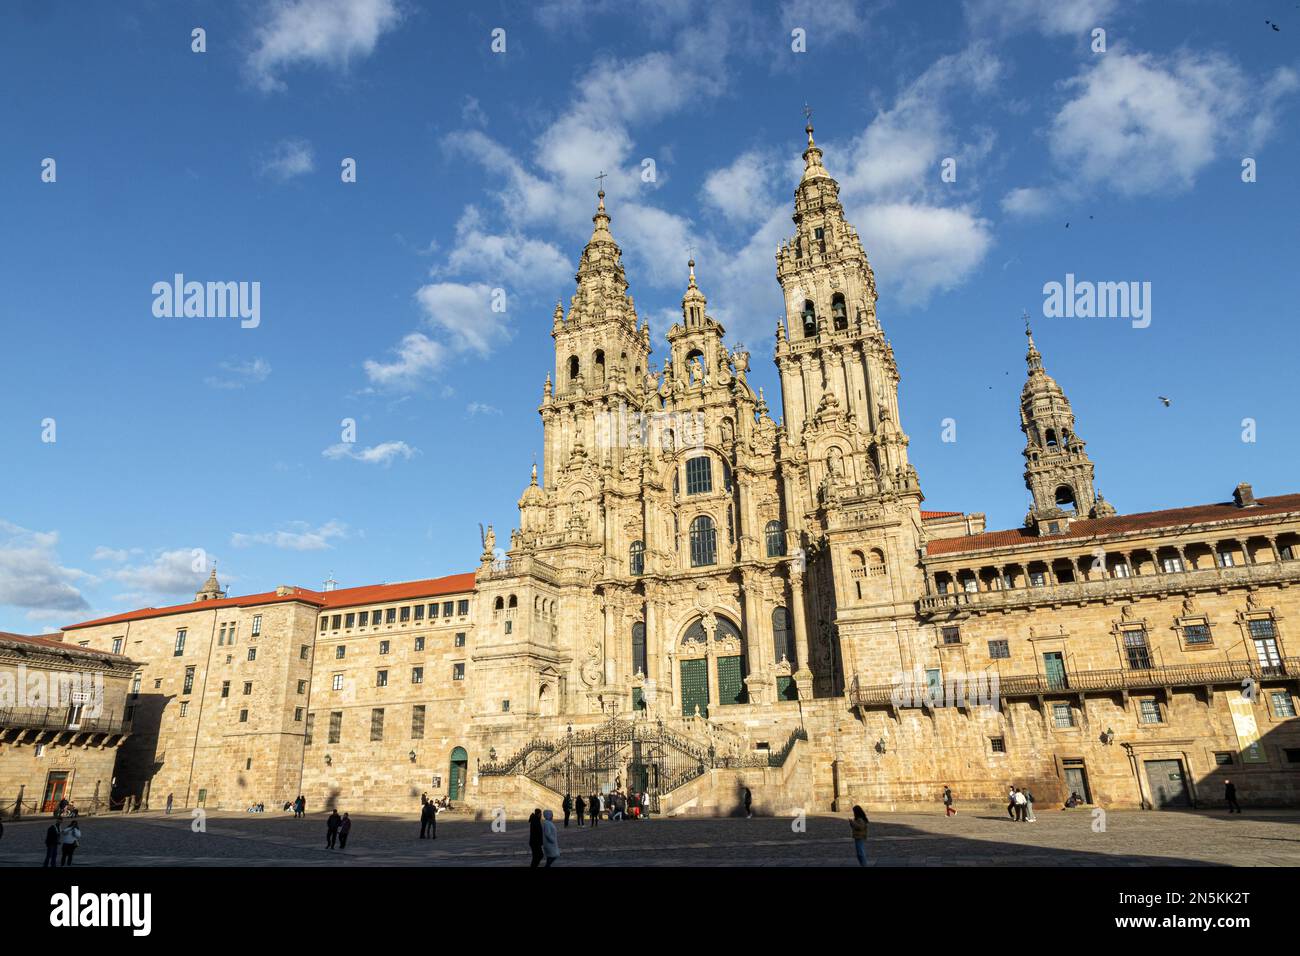 Santiago de Compostela, Spain. Views of the main facade of the Cathedral of Saint James from the Obradoiro Square Stock Photo